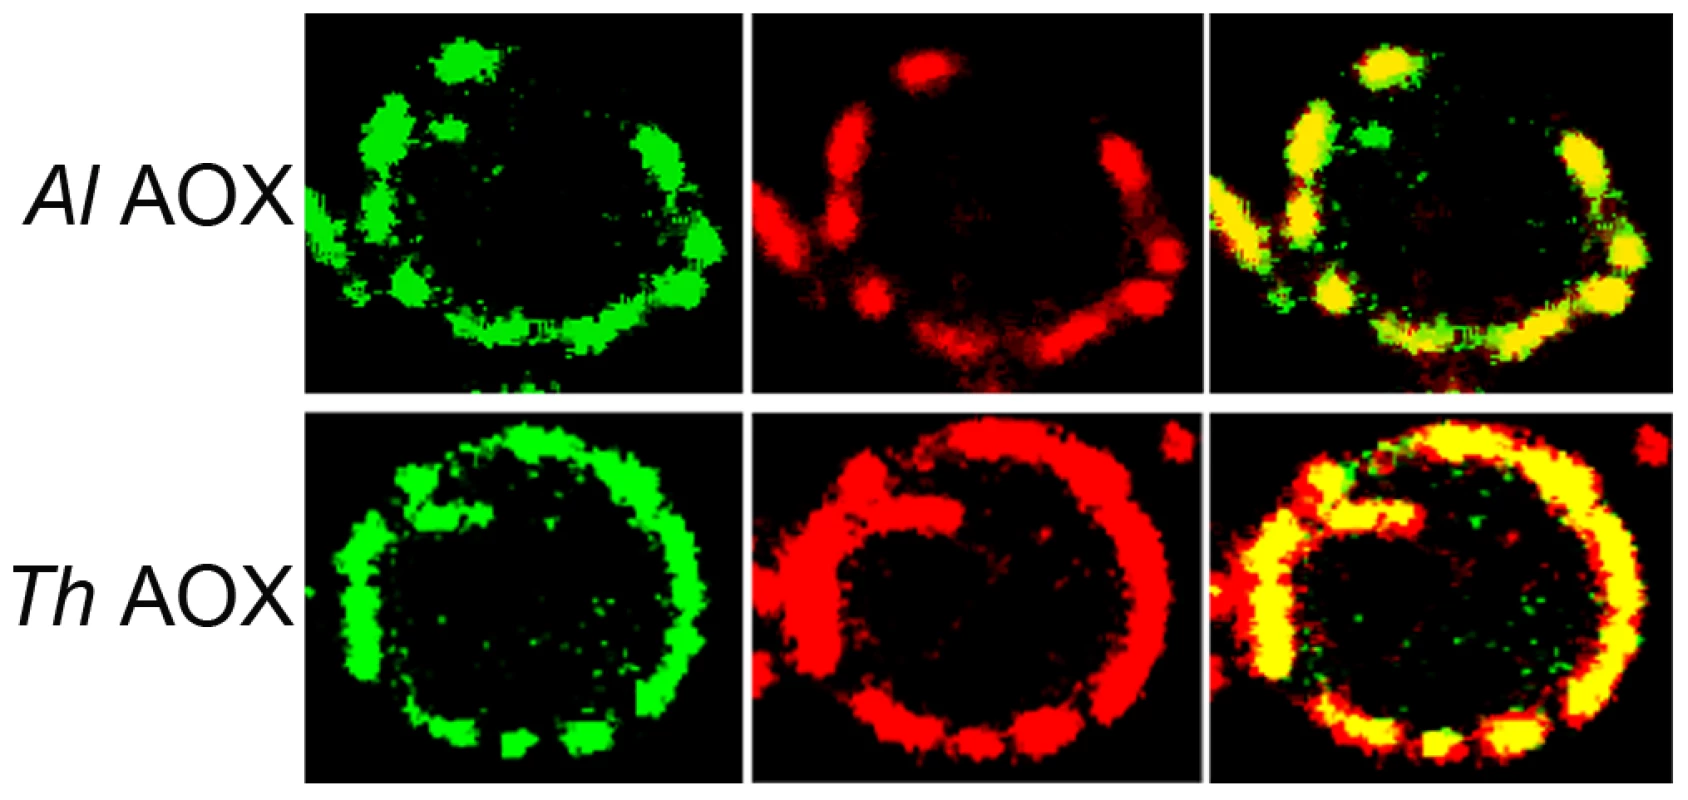 Transfection of <i>S. cerevisiae</i> cells with AOX-GFP constructs.